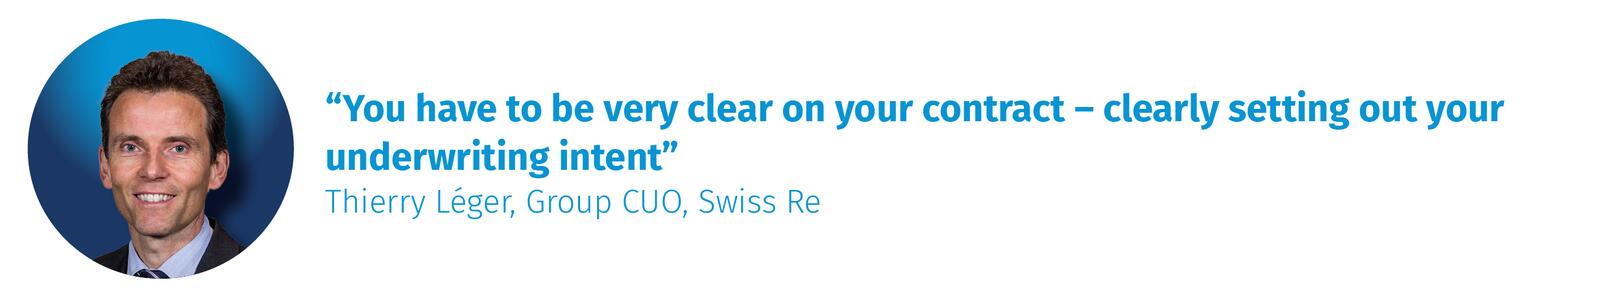 Thierry Léger, Group CUO, Swiss Re